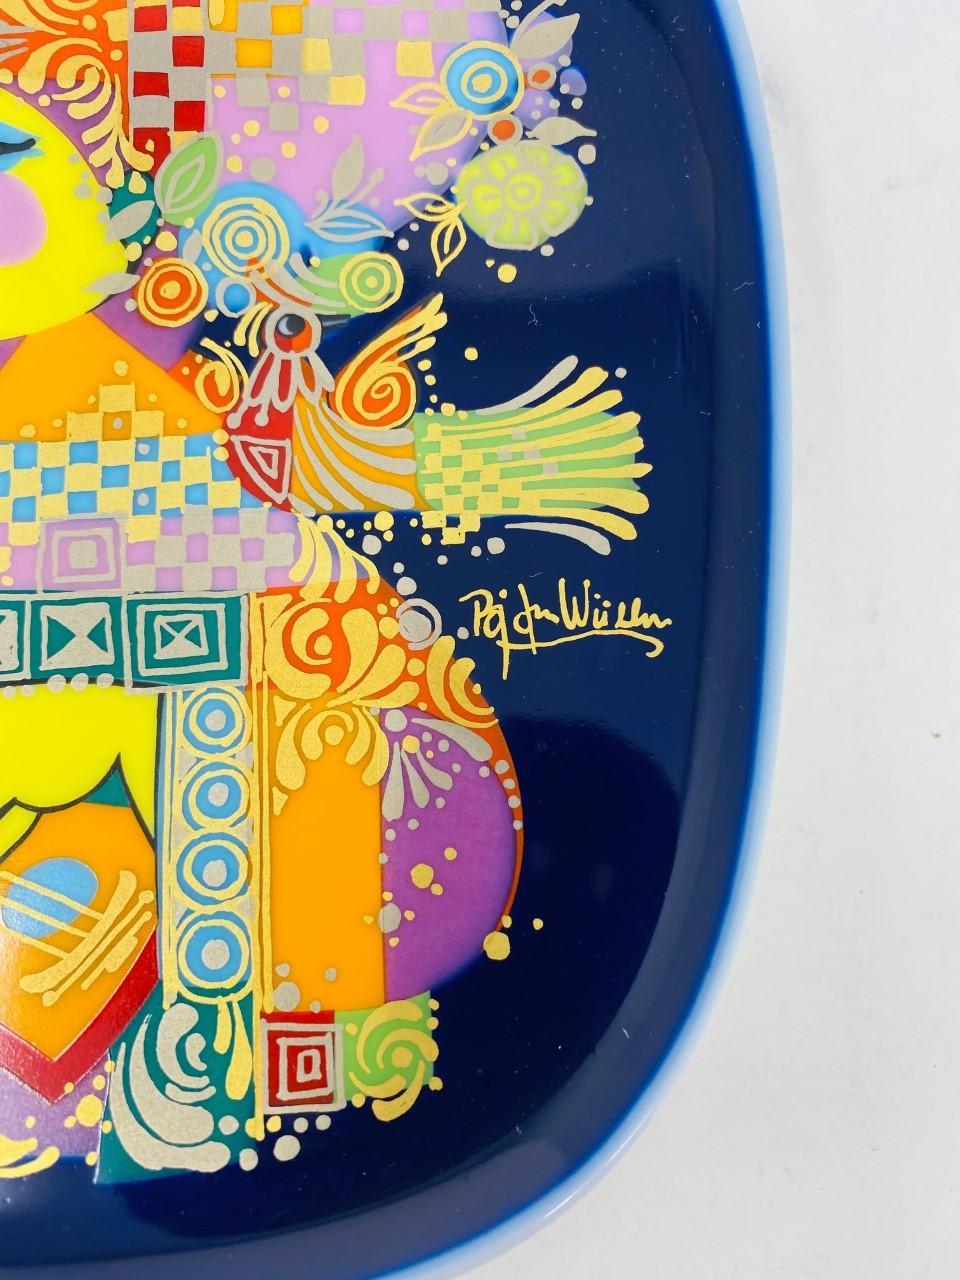 Hand-Crafted Vintage Bjorn Wiindblad Decorative Plate 1001 Nights Lute Player Plate For Sale